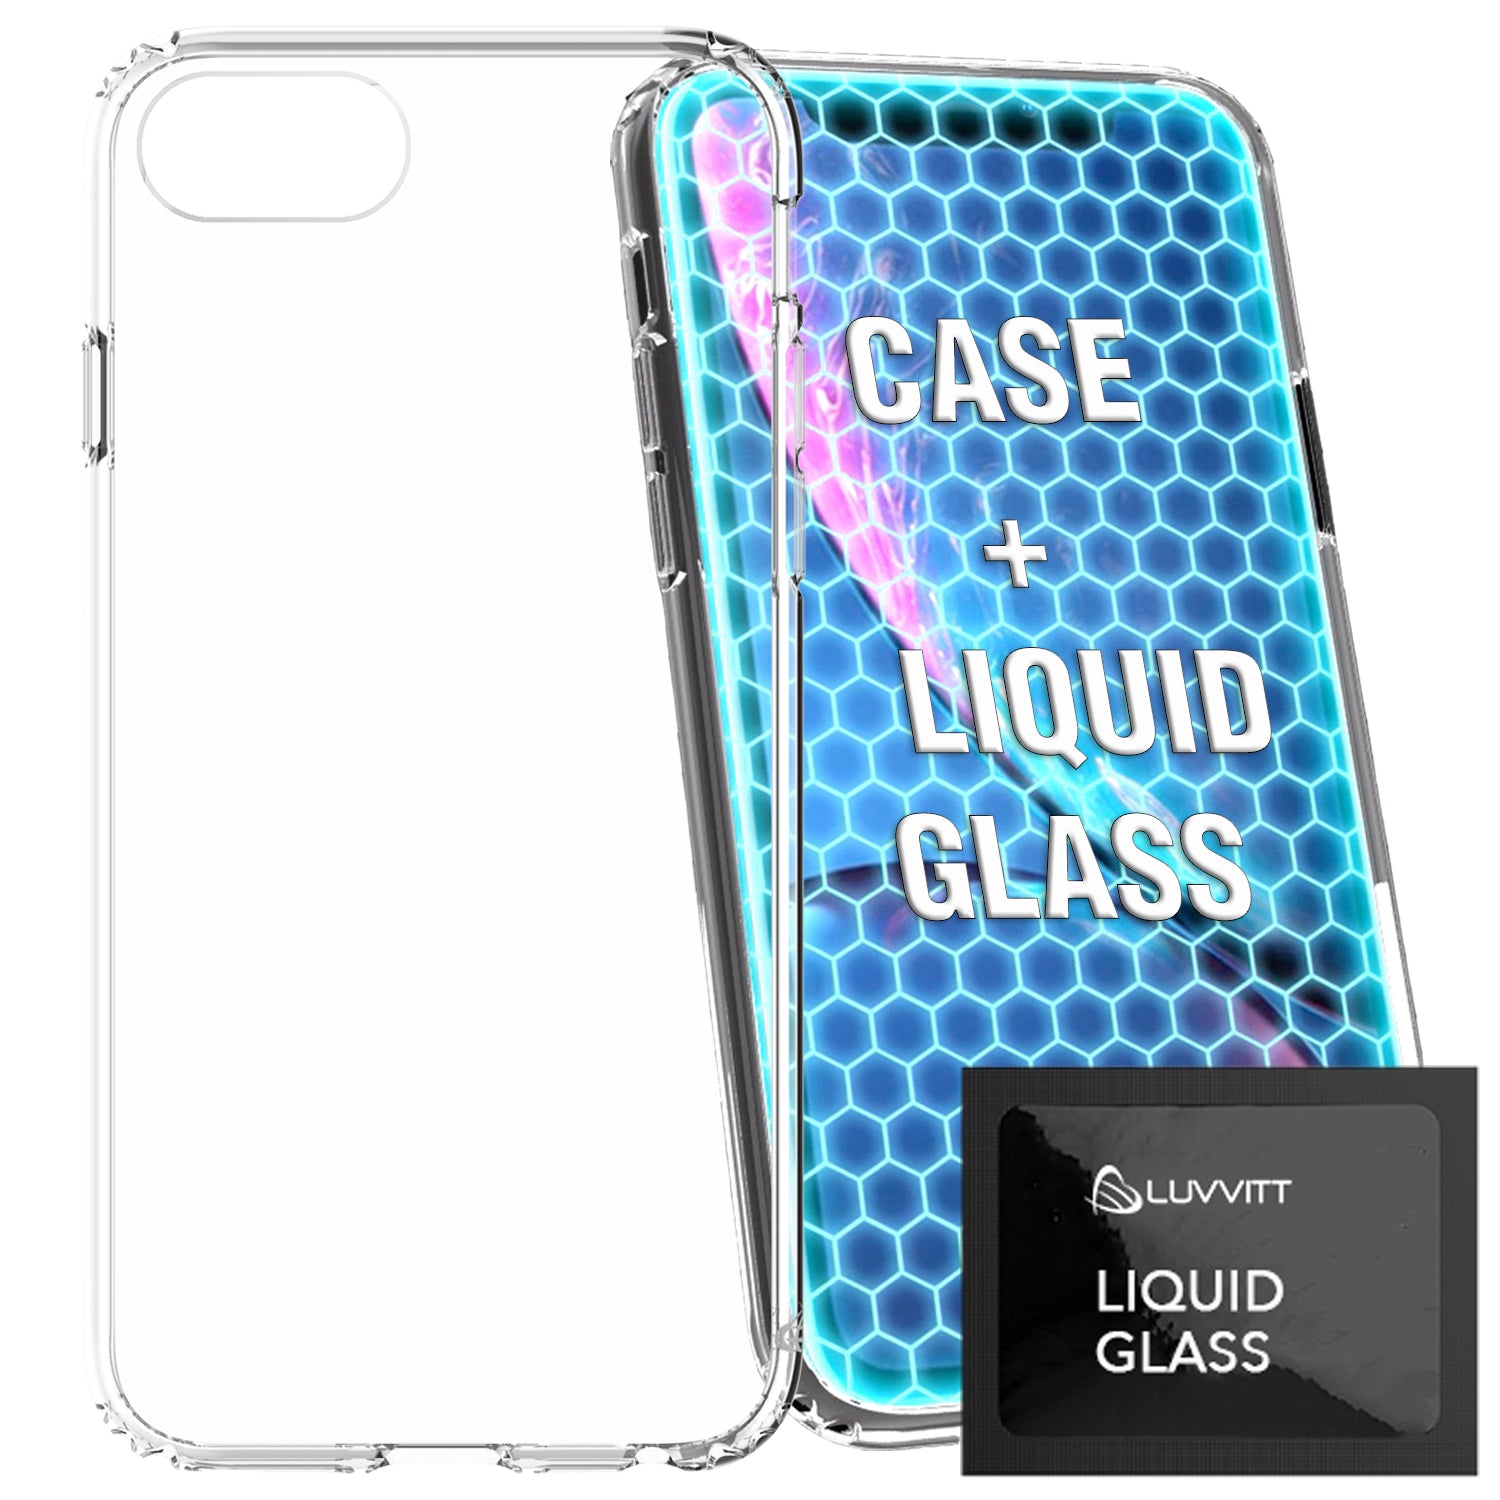 Clear Case and Liquid Glass Screen Protector for iPhone SE 2020